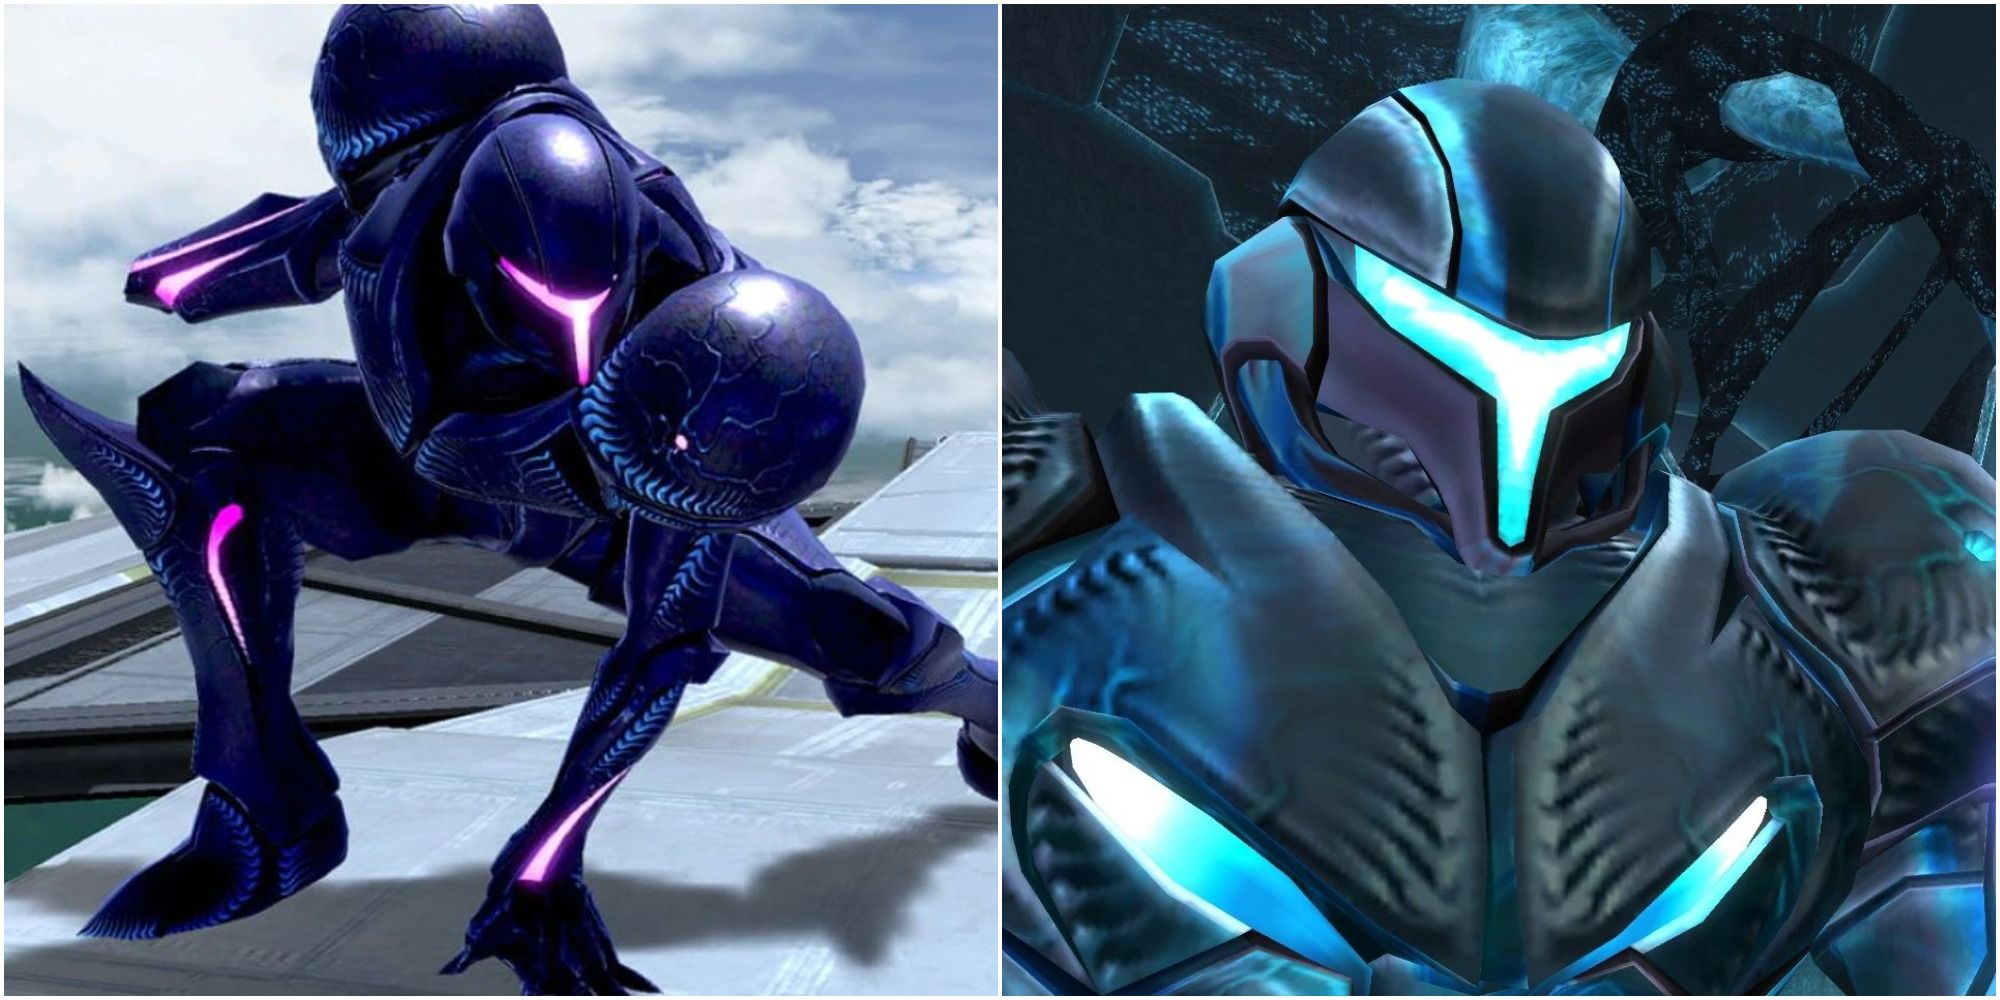 Things you should know about Dark Samus